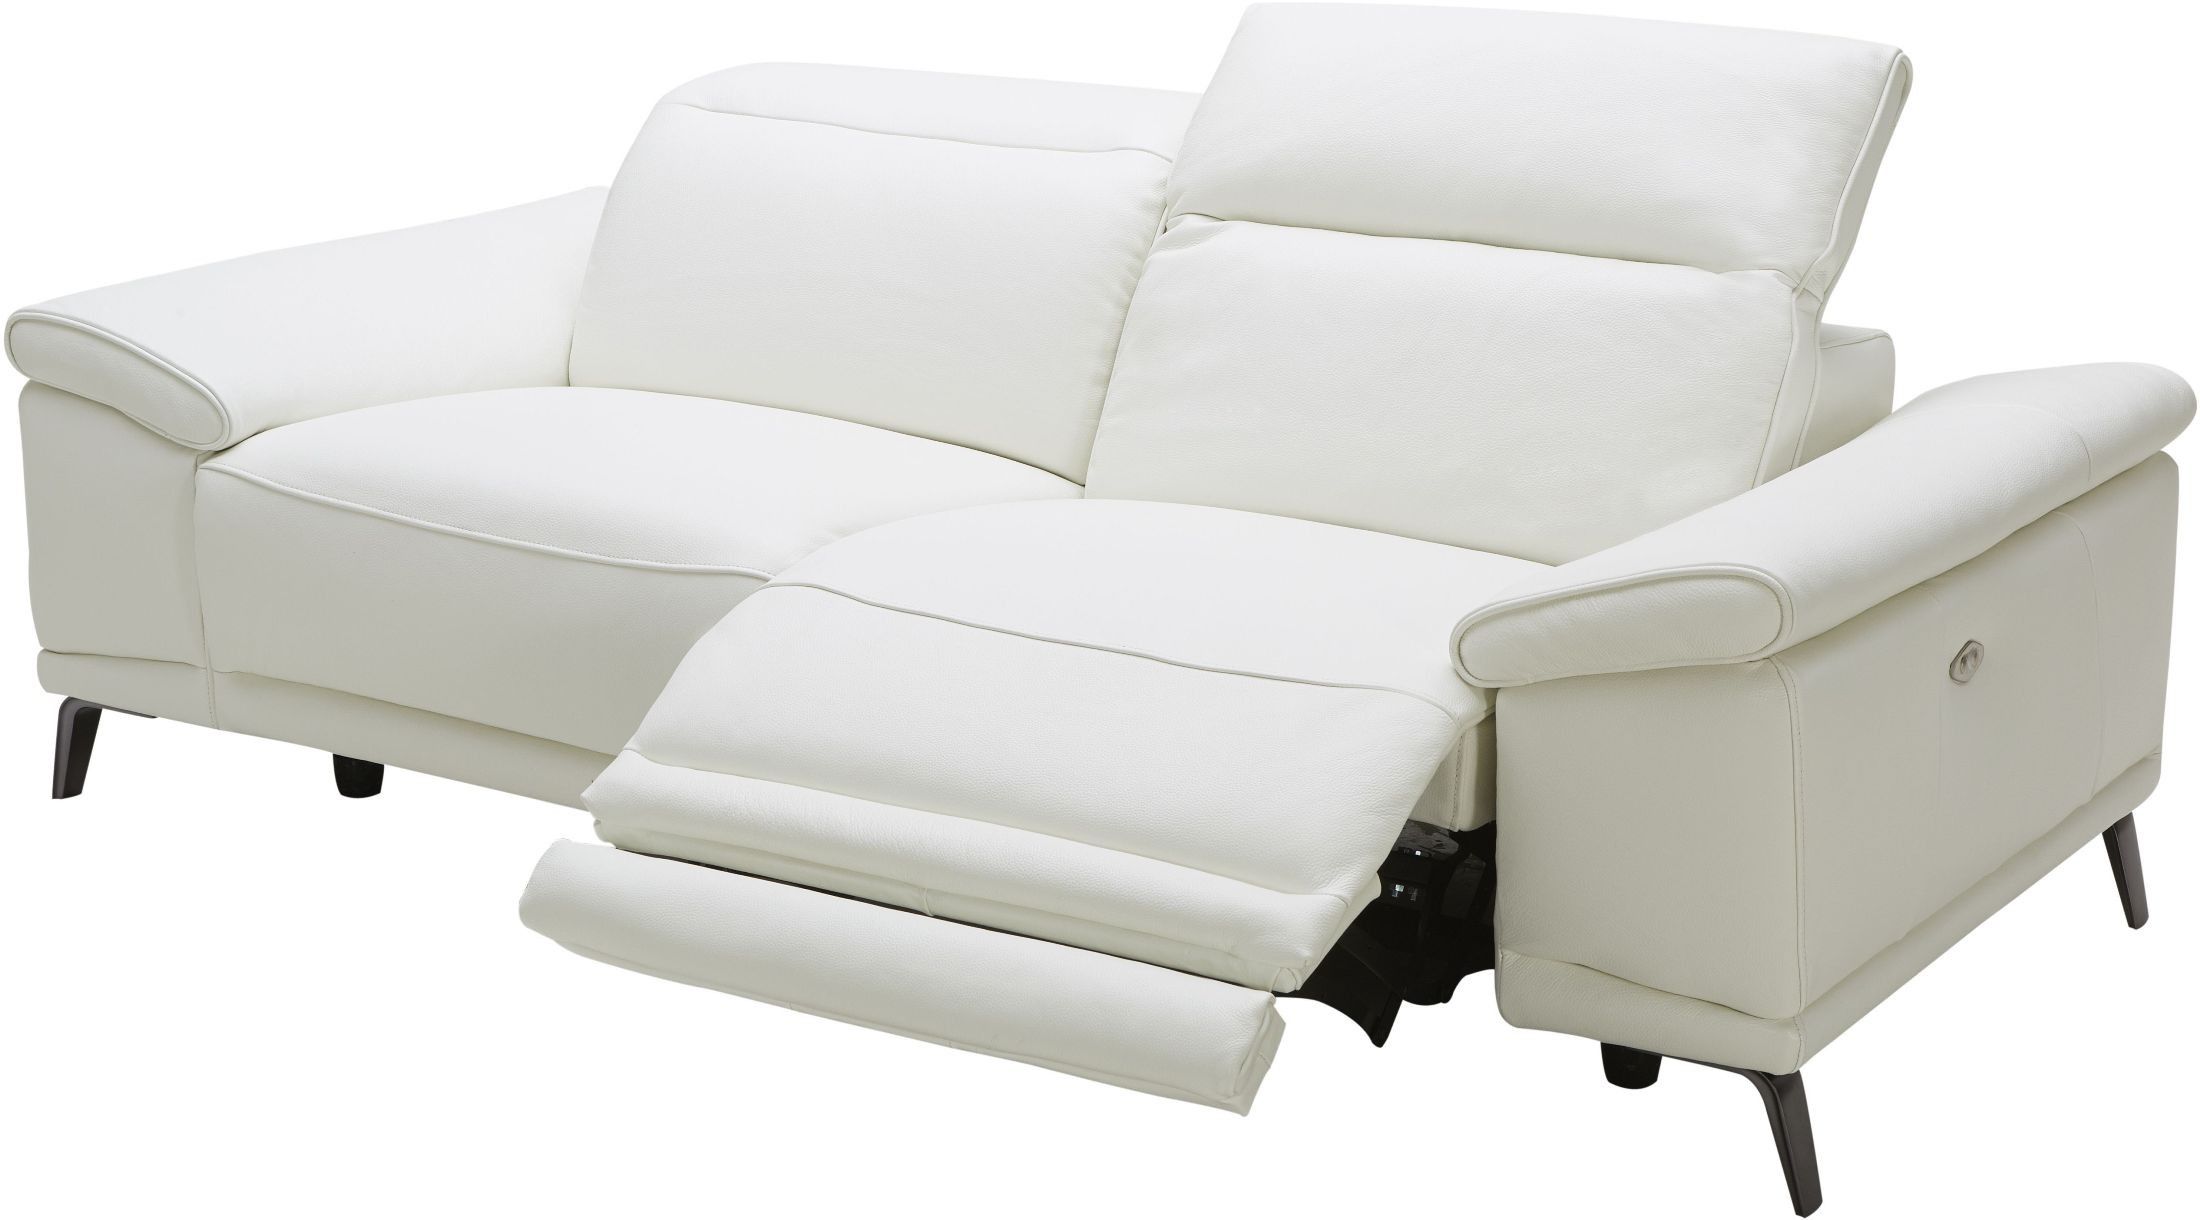 Gaia White Leather Power Reclining Sofa, 18253 S, J&m Throughout Power Reclining Sofas (View 10 of 15)